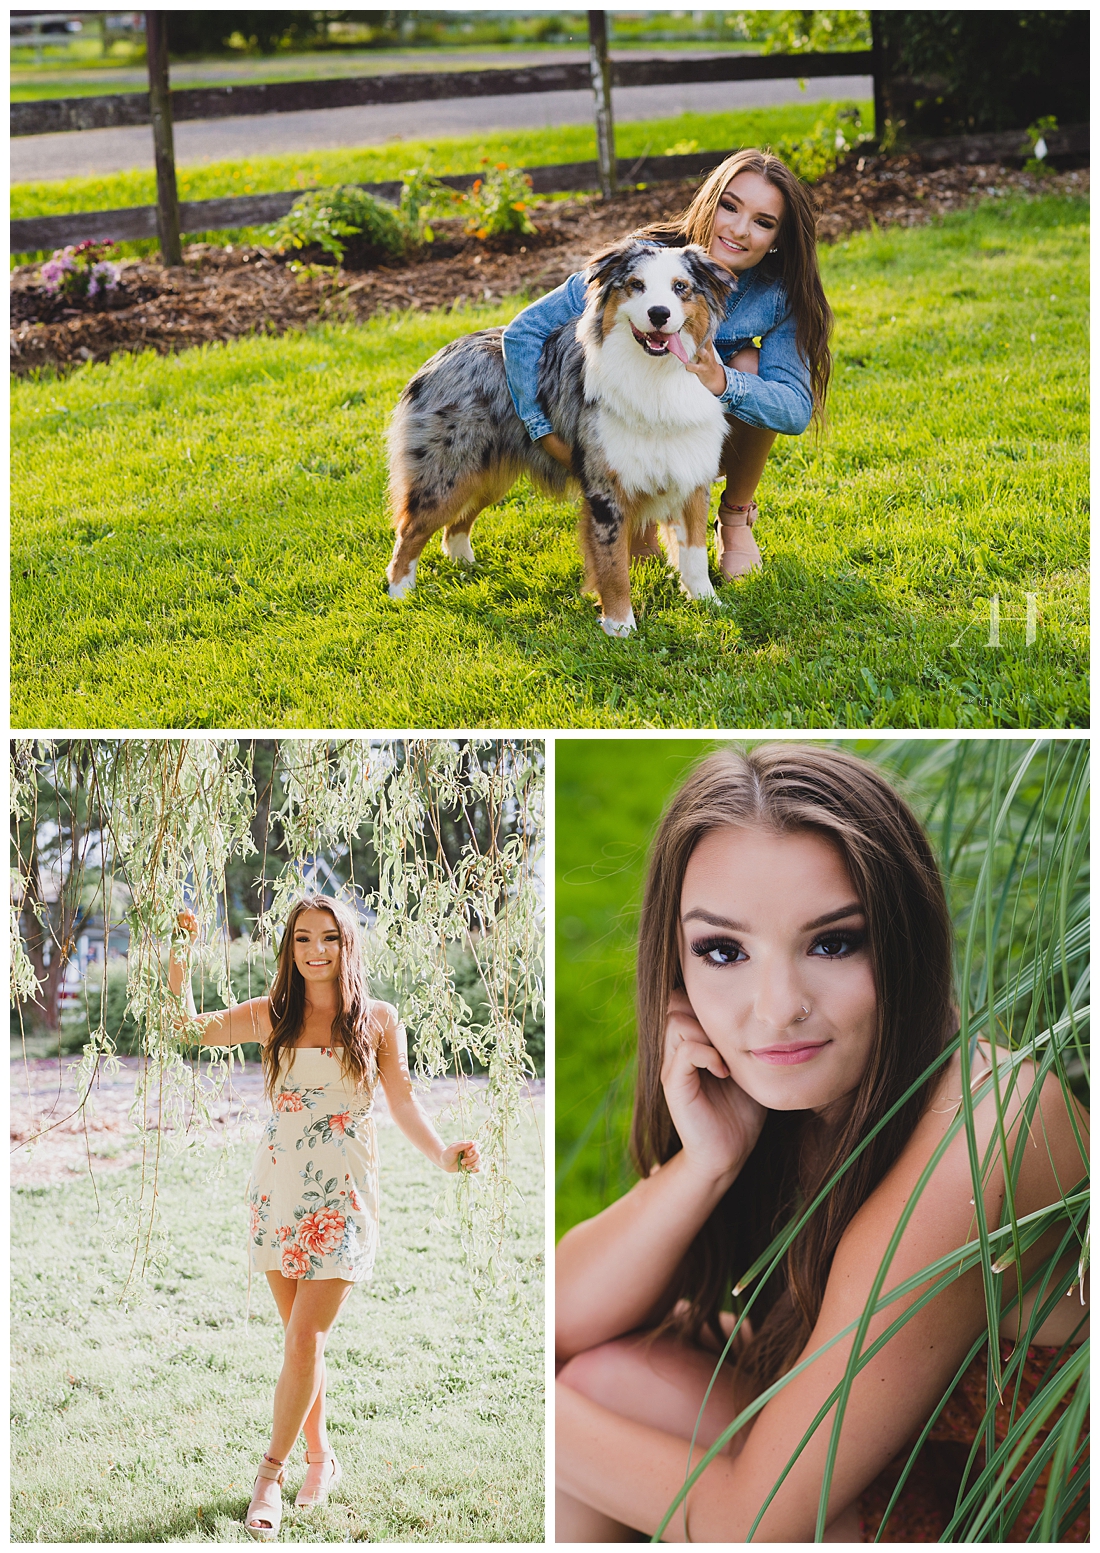 Fun Summer Senior Portraits in Tacoma | The Best Season for Senior Portraits | Senior Girls with Dogs, Friends, Cute Outfits, Pose Ideas | Photographed by Tacoma Senior Photographer Amanda Howse